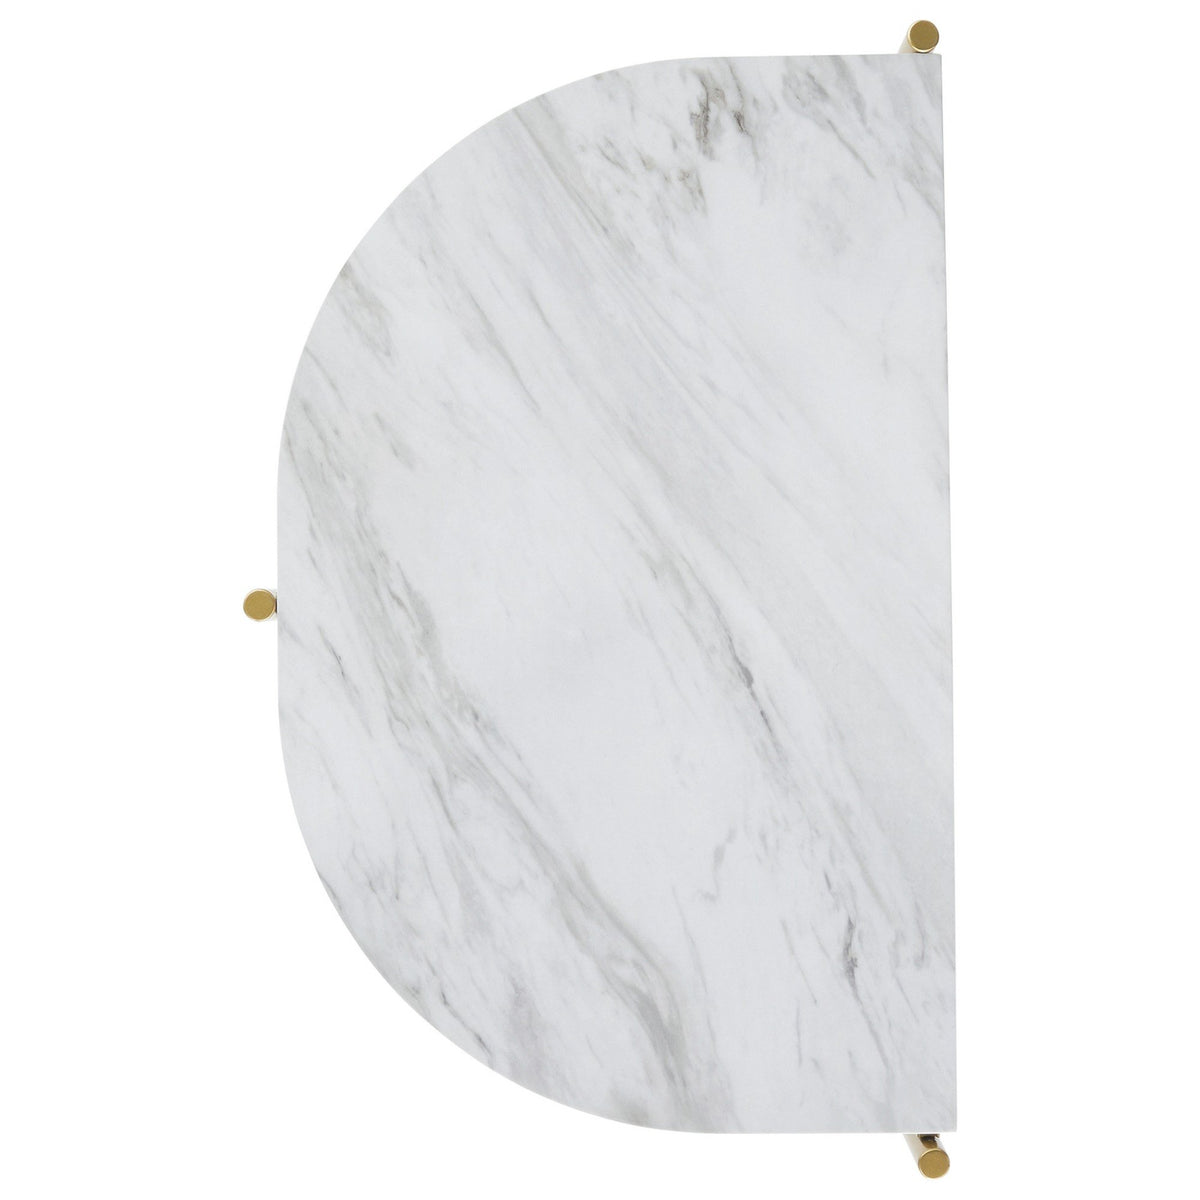 Crescent Moon Shaped Marble Top Metal Chair Side End Table, White and Gold - BM226513